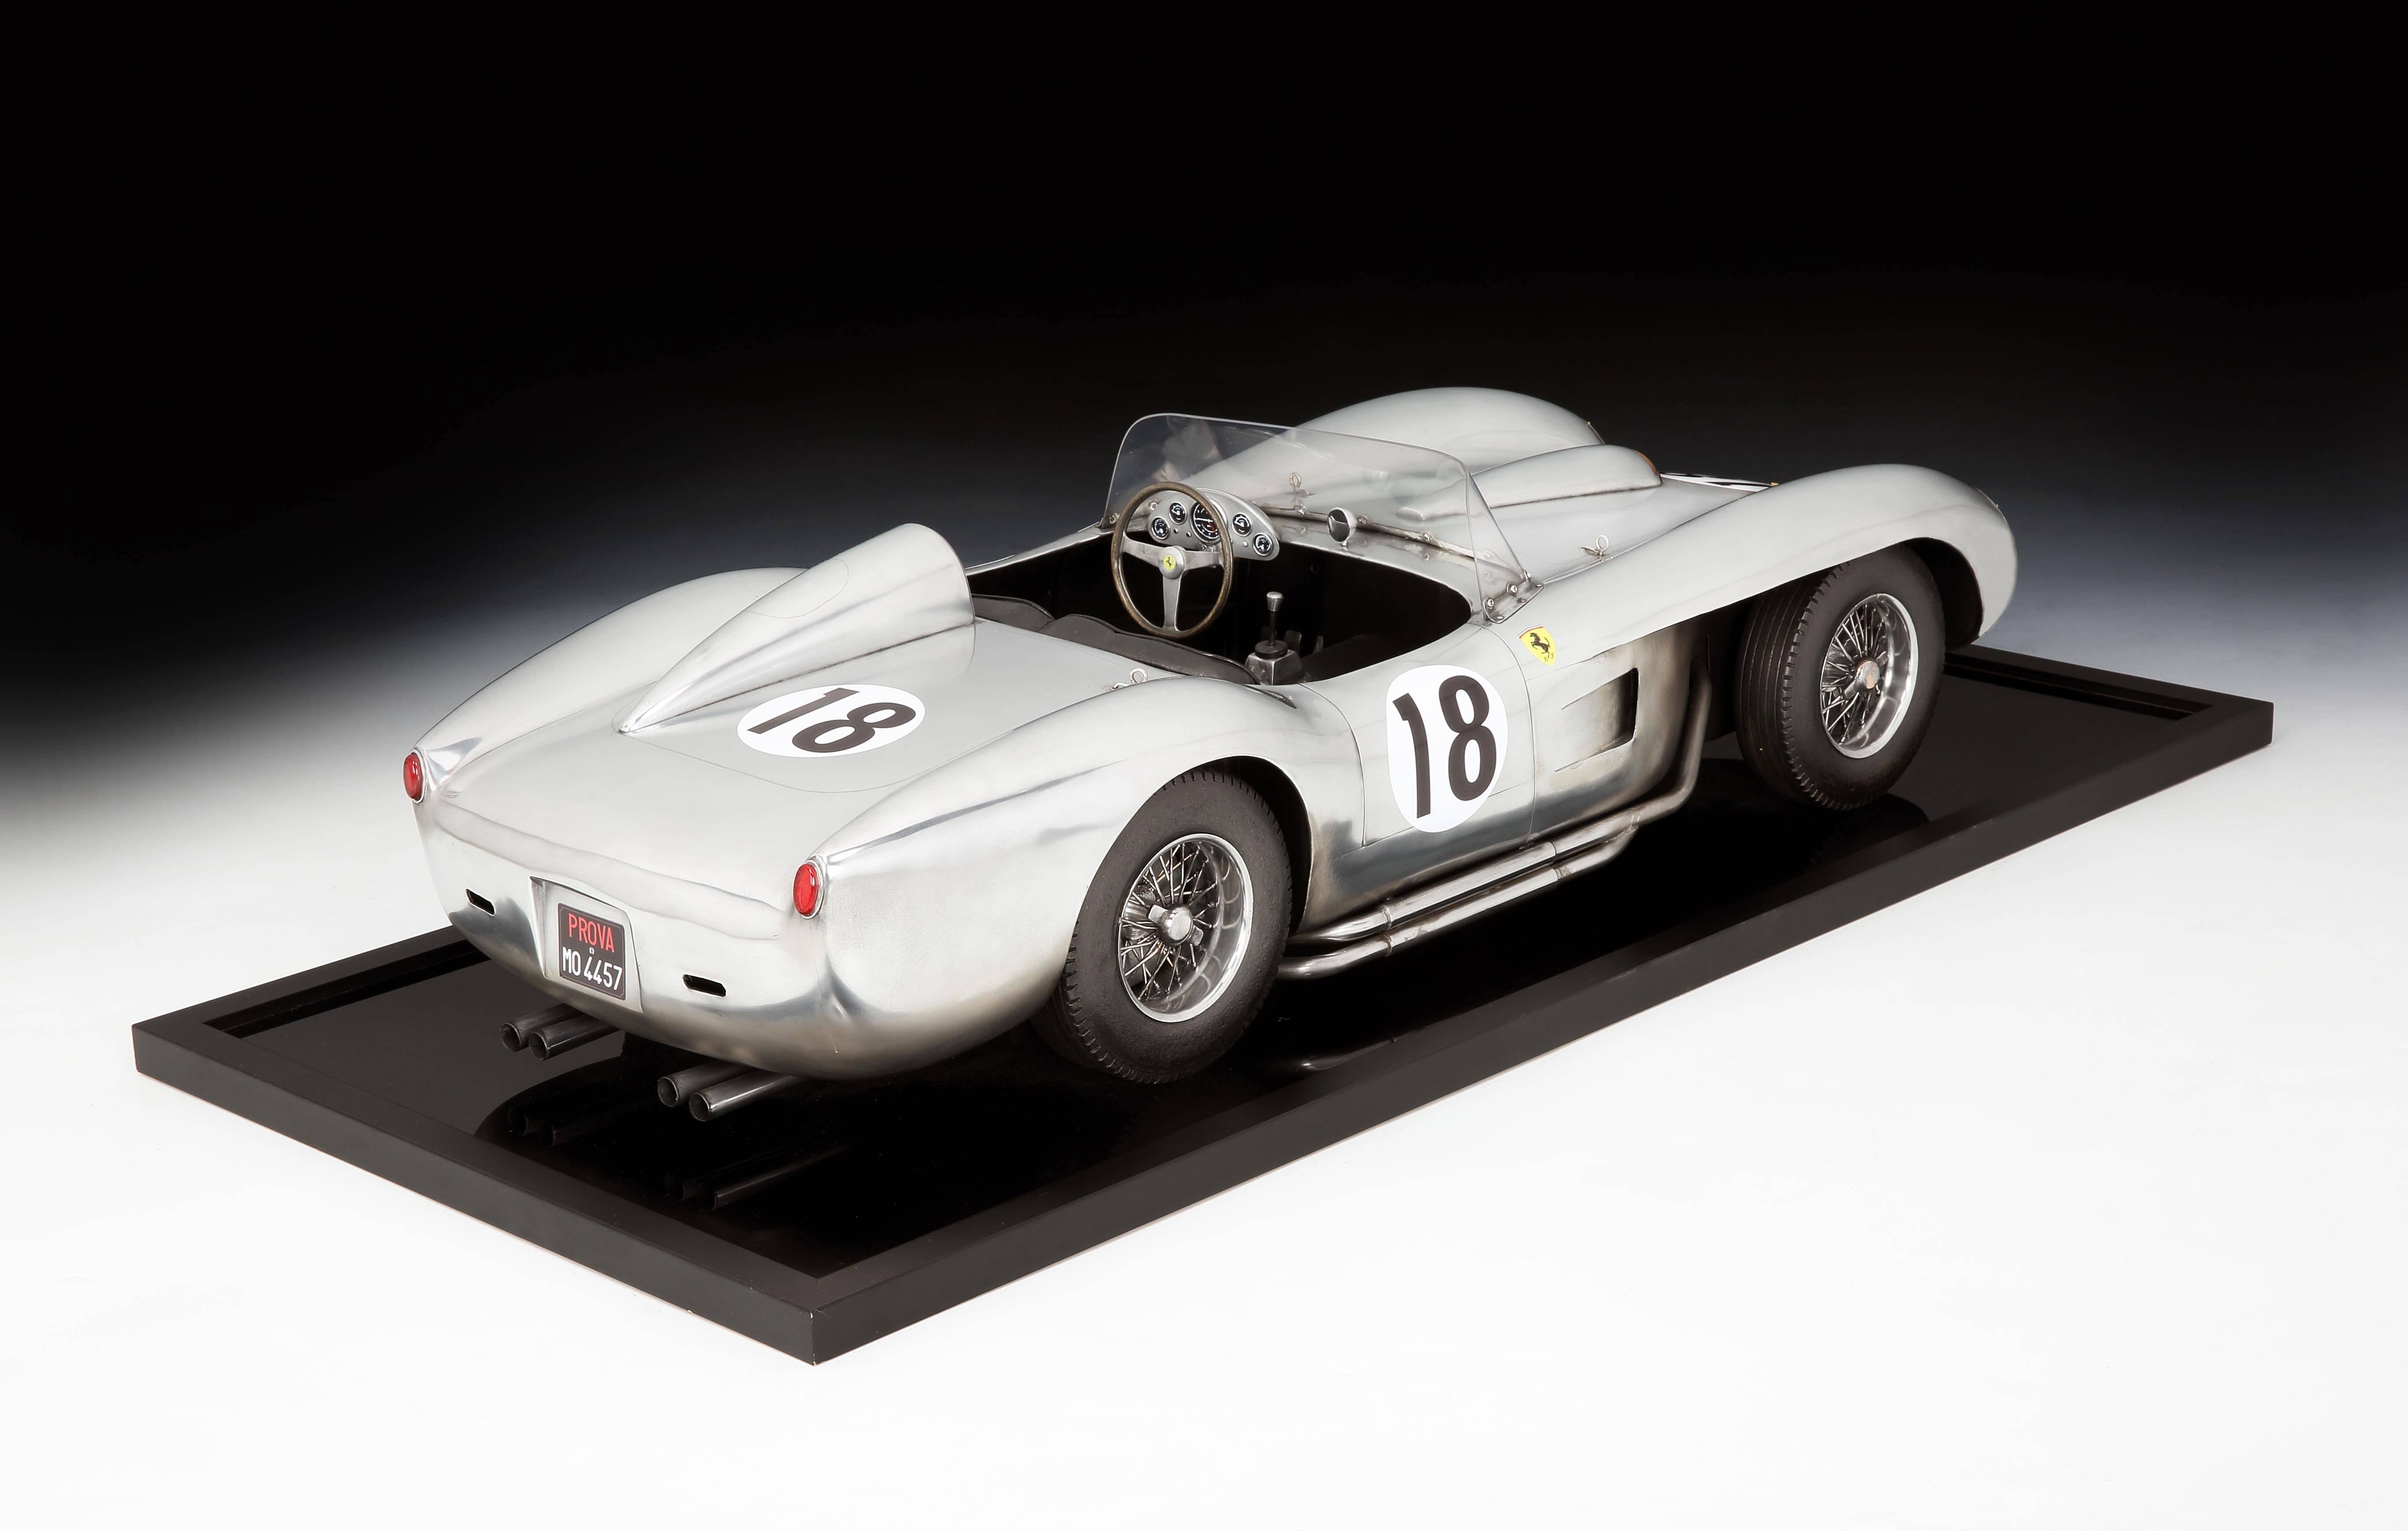 A powerful example of the car as art in the form of a large-scale model of the 1958 Le Mans winning Ferrari 250 (TR) Testa Rossa racing car, meticulously detailed in metal, leather and wood, with wire wheels and spinners, the body in formed aluminum